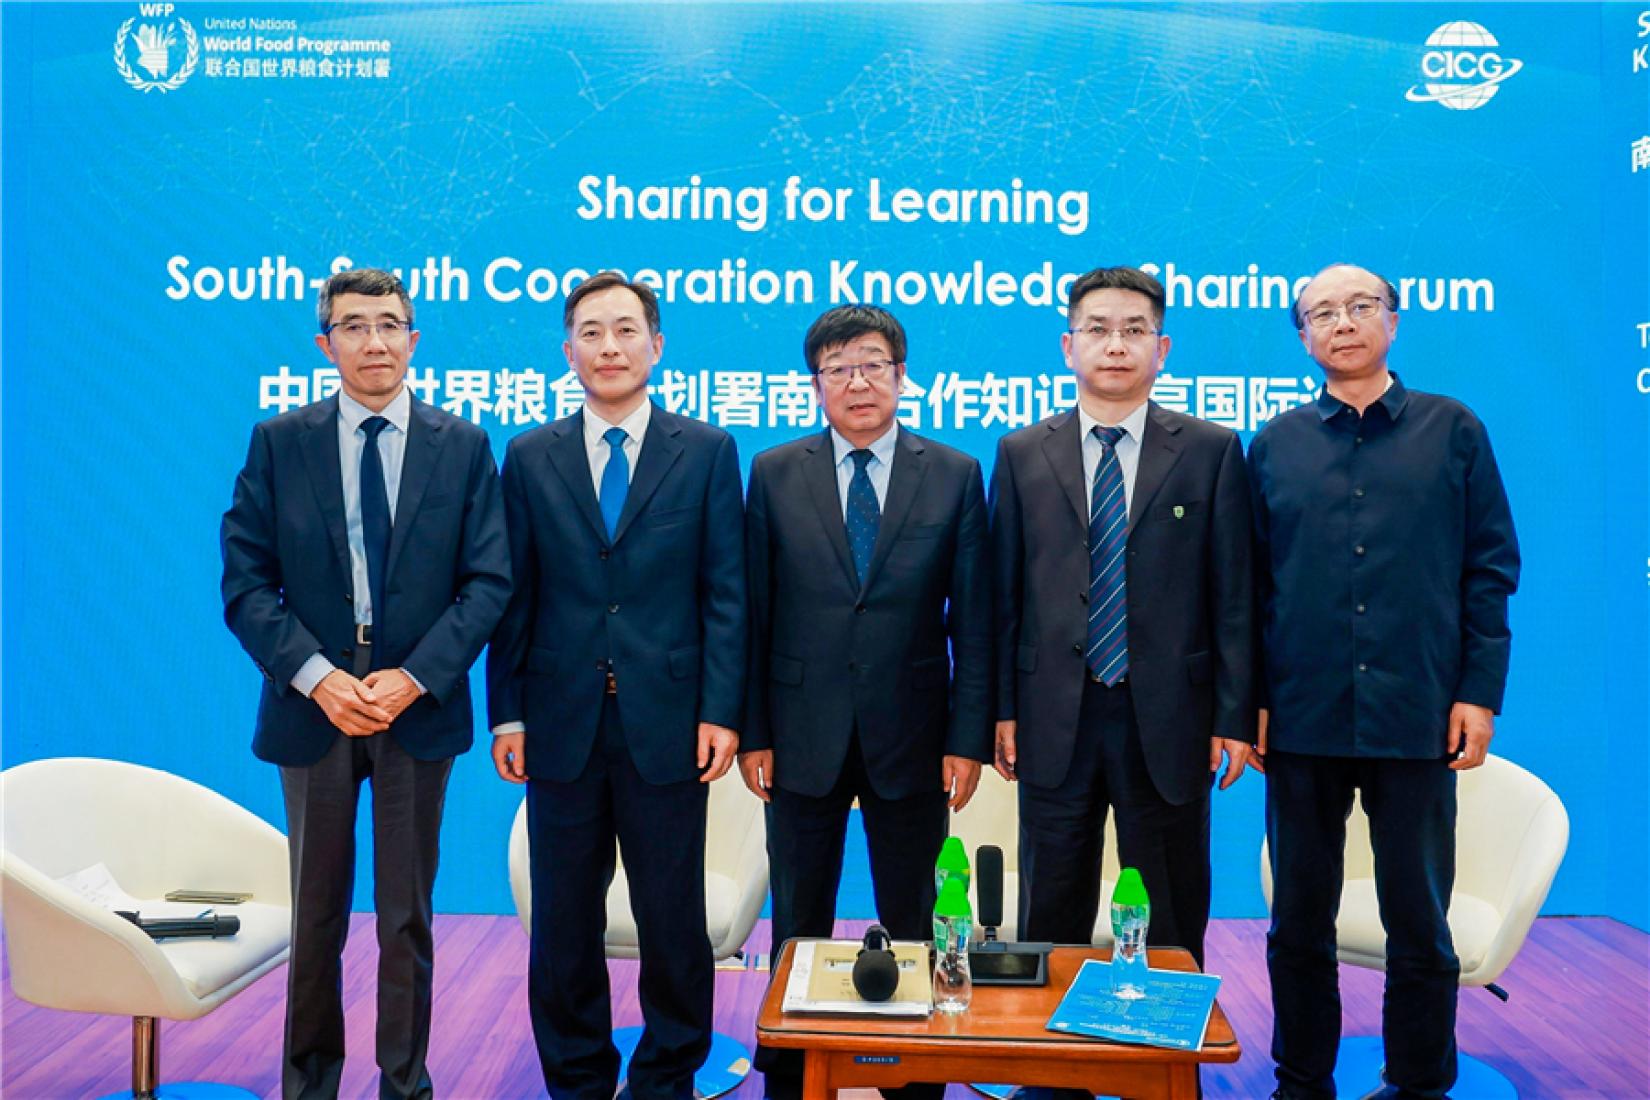 Participants of a discussion known as the “High-level Dialogue on the Role of Science and Technology in South-South Cooperation Oriented towards Attaining the Sustainable Development Goals” pose for a photo